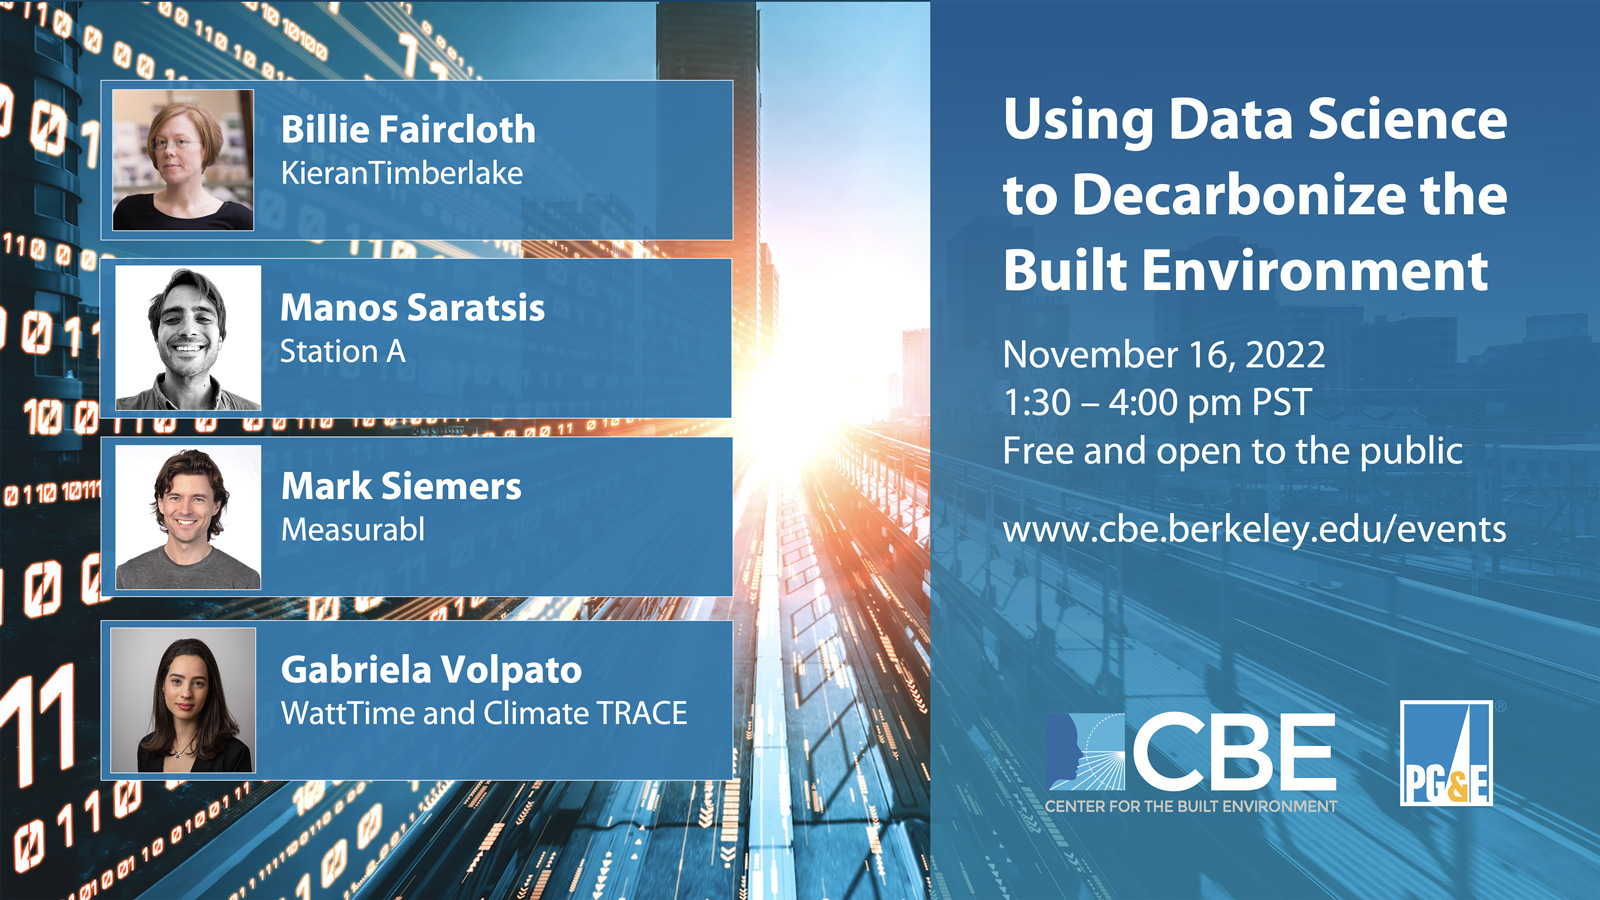 Using Data Science to Decarbonize the Built Environment